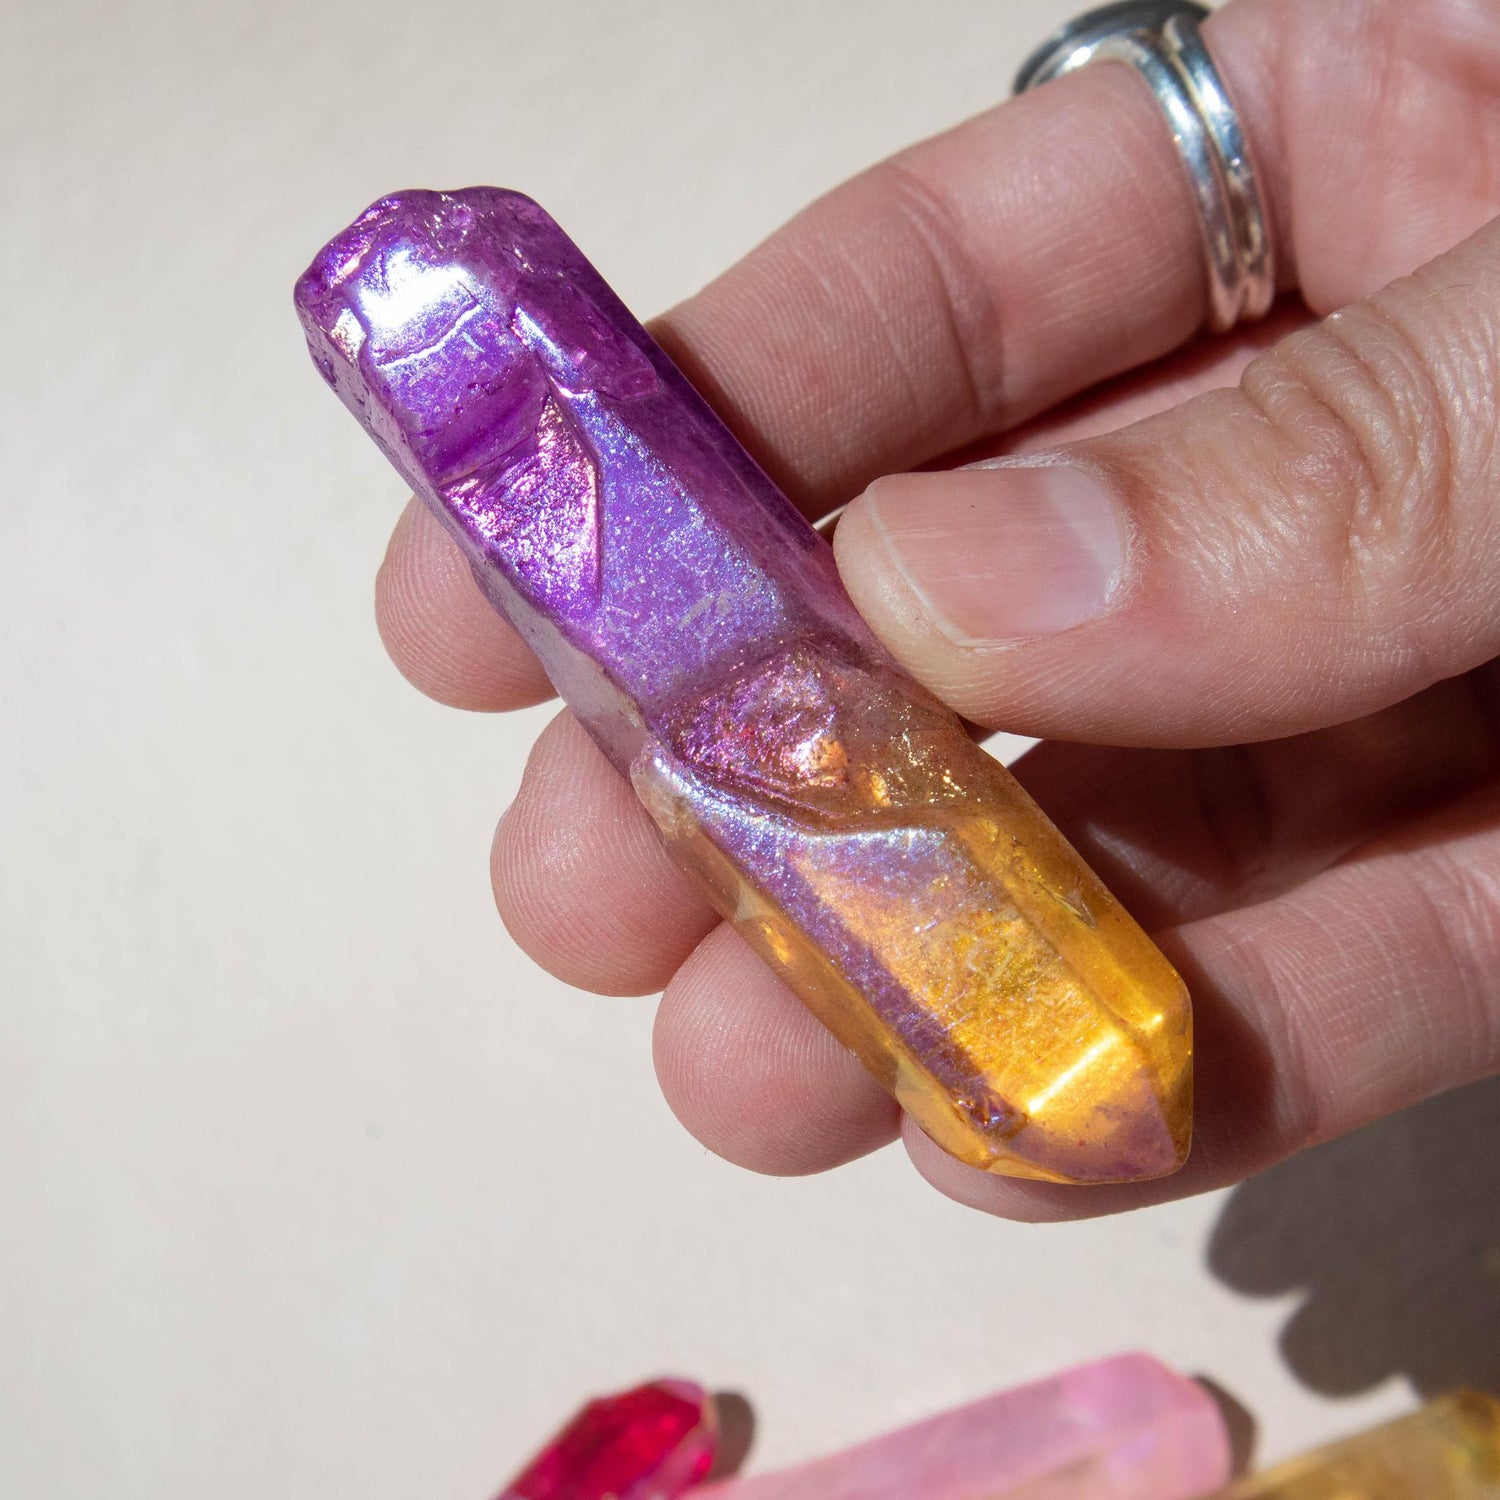 sunset aura, sunset aura quartz, aura quartz point, crystal point, sunset aura crystal, sunset aura stone, sunset aura properties, sunset aura healing properties, sunset aura metaphysical properties, sunset aura meaning